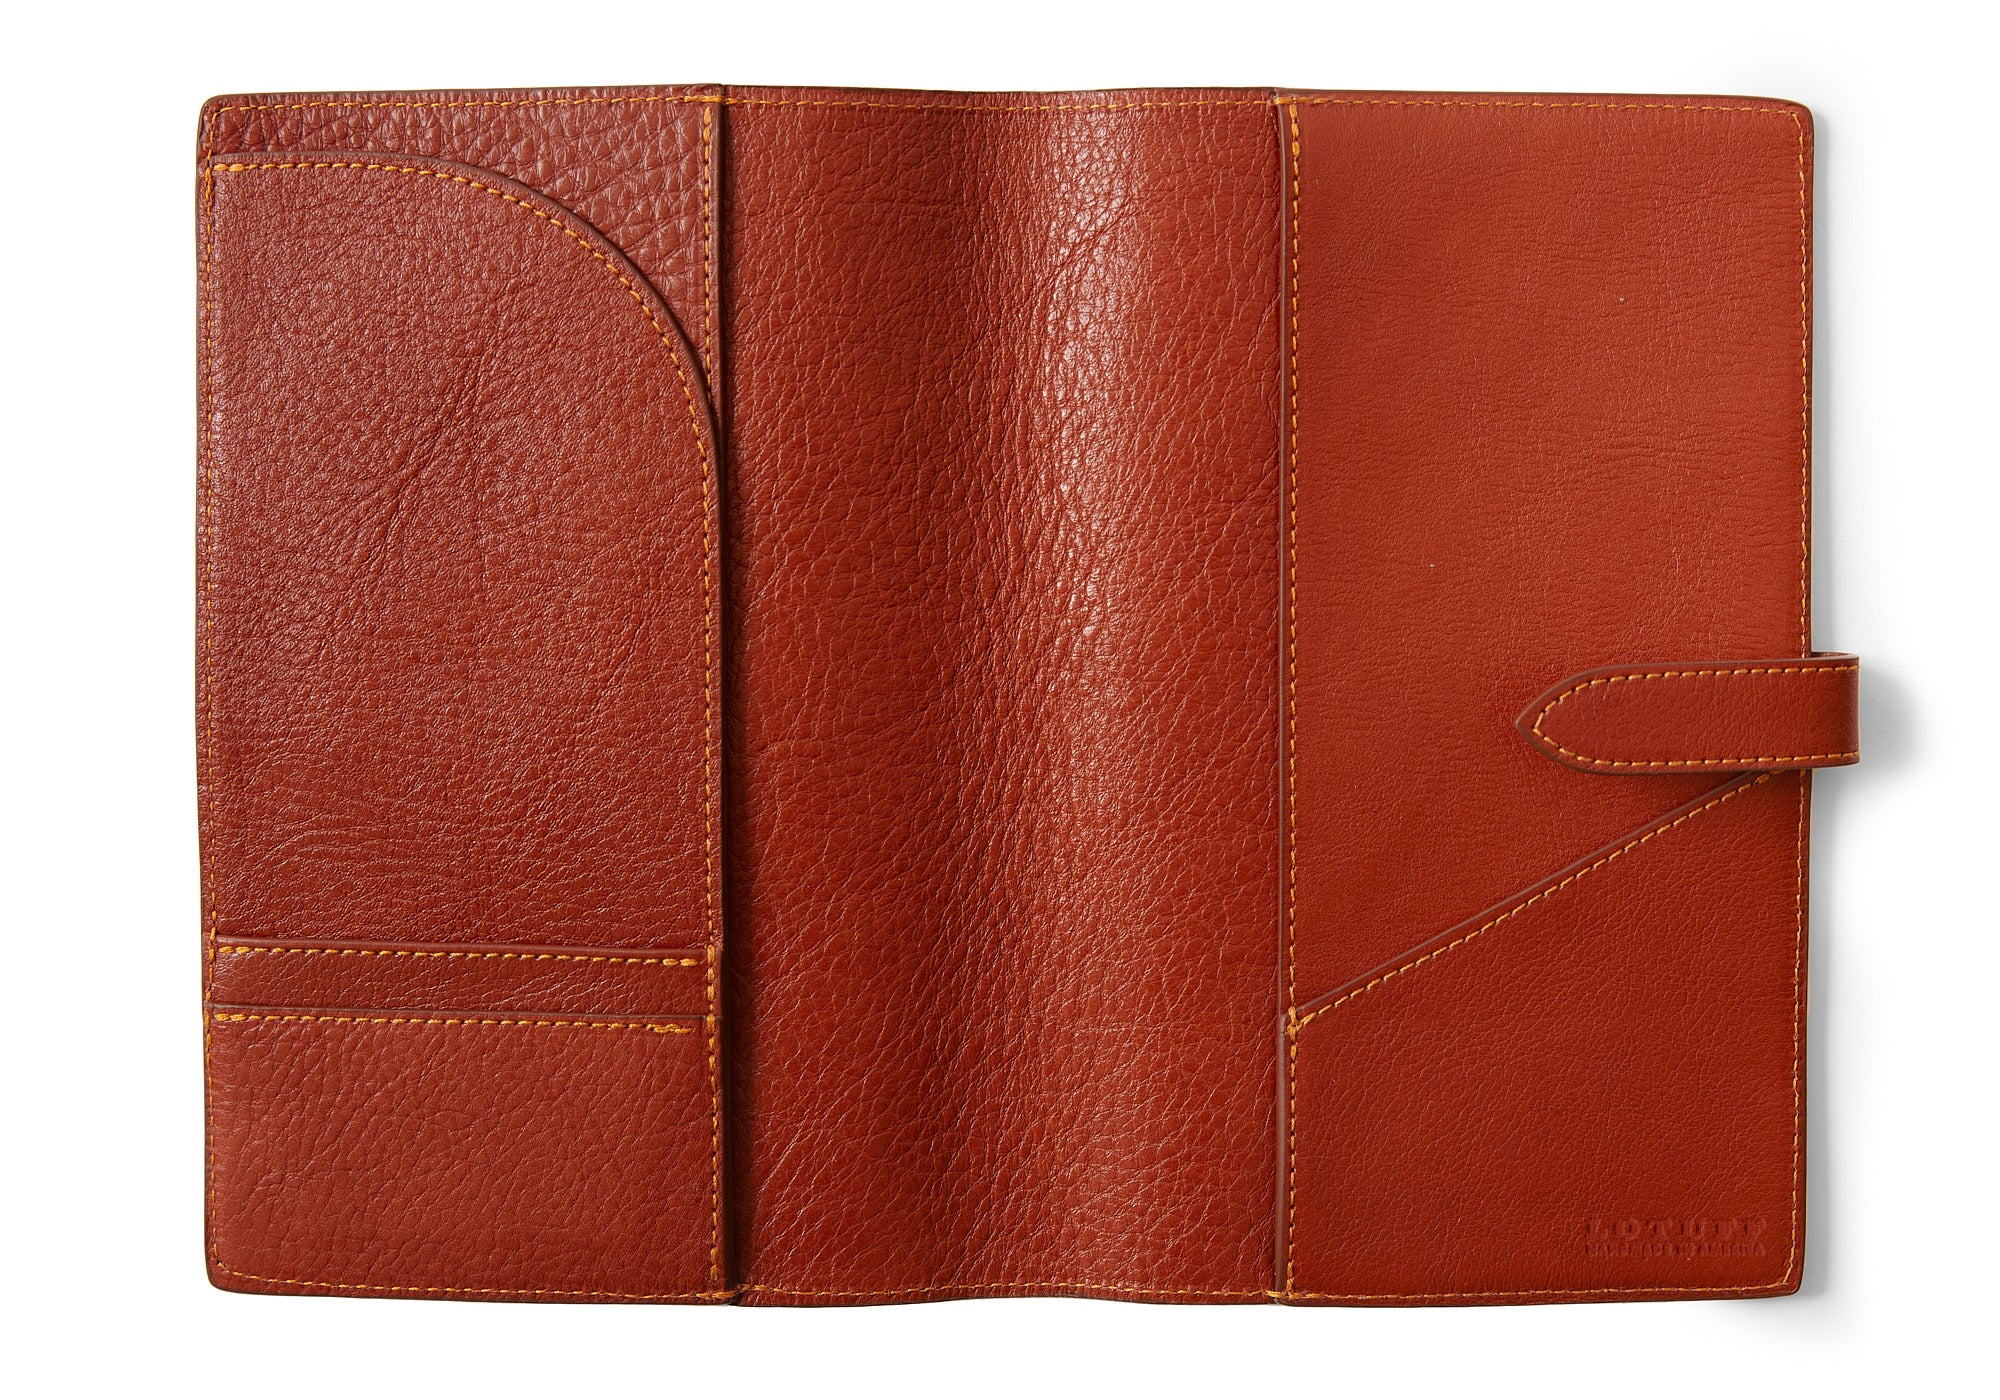 Top of Leather Travel Journal Saddle Tan